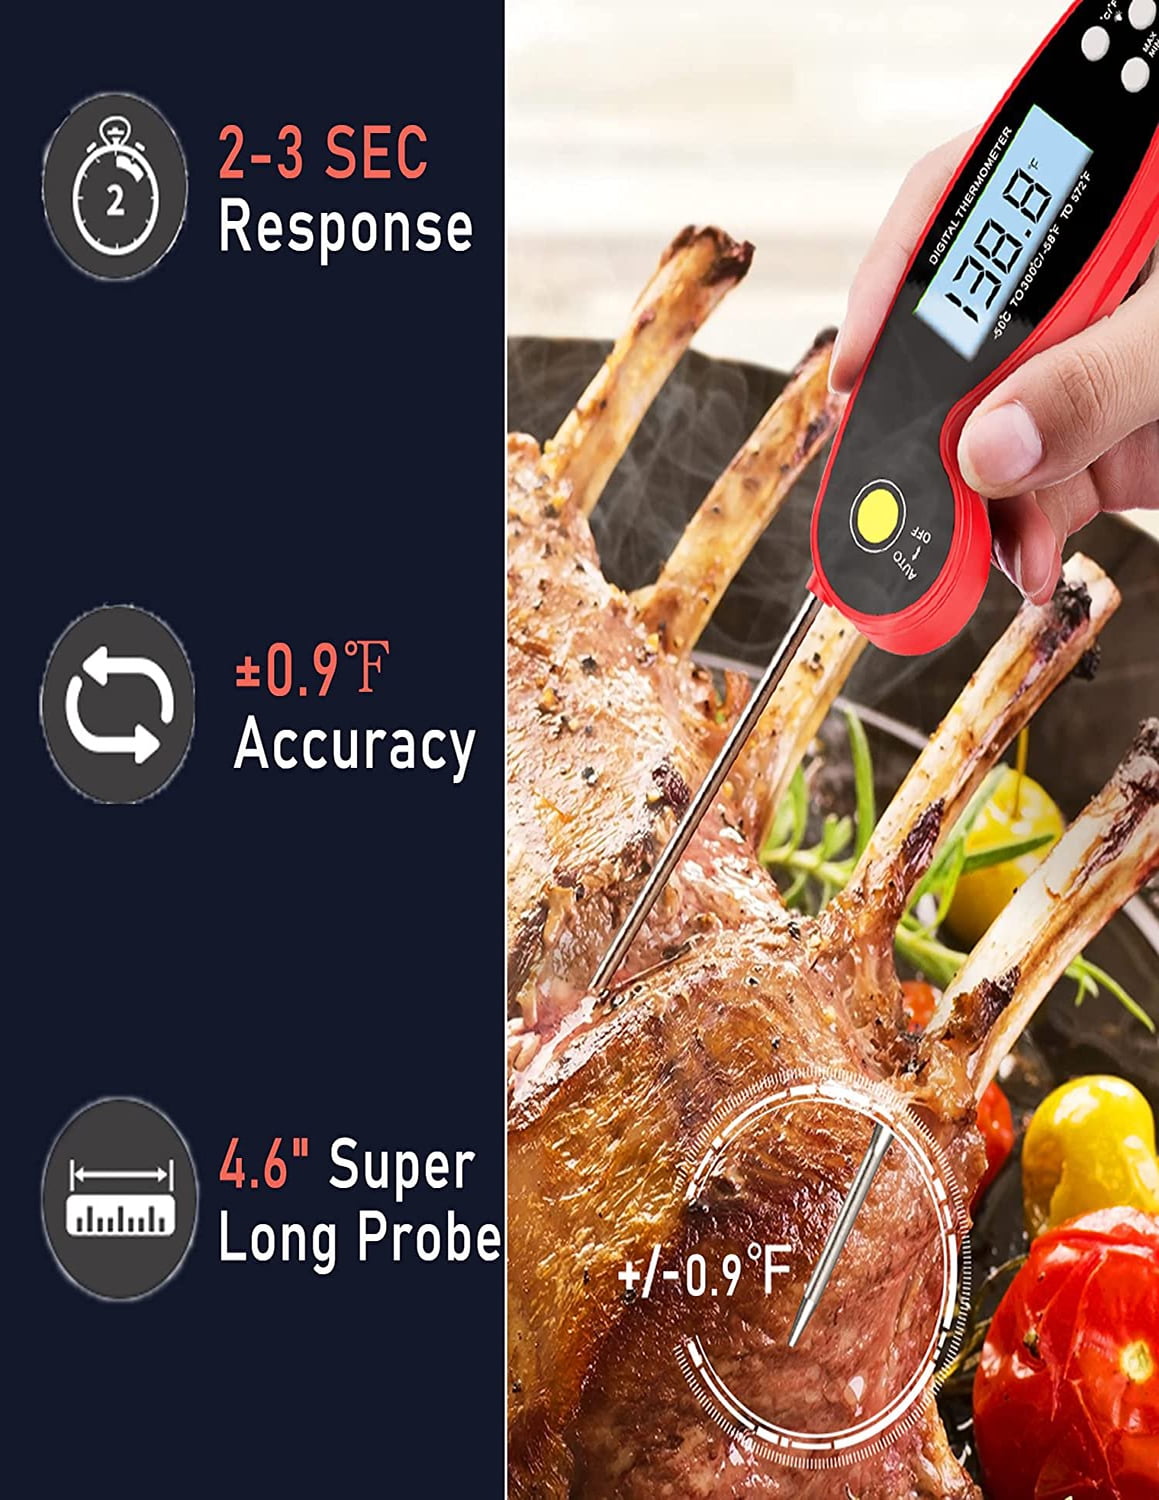 Habor Grill Thermometer review – Shop Smart